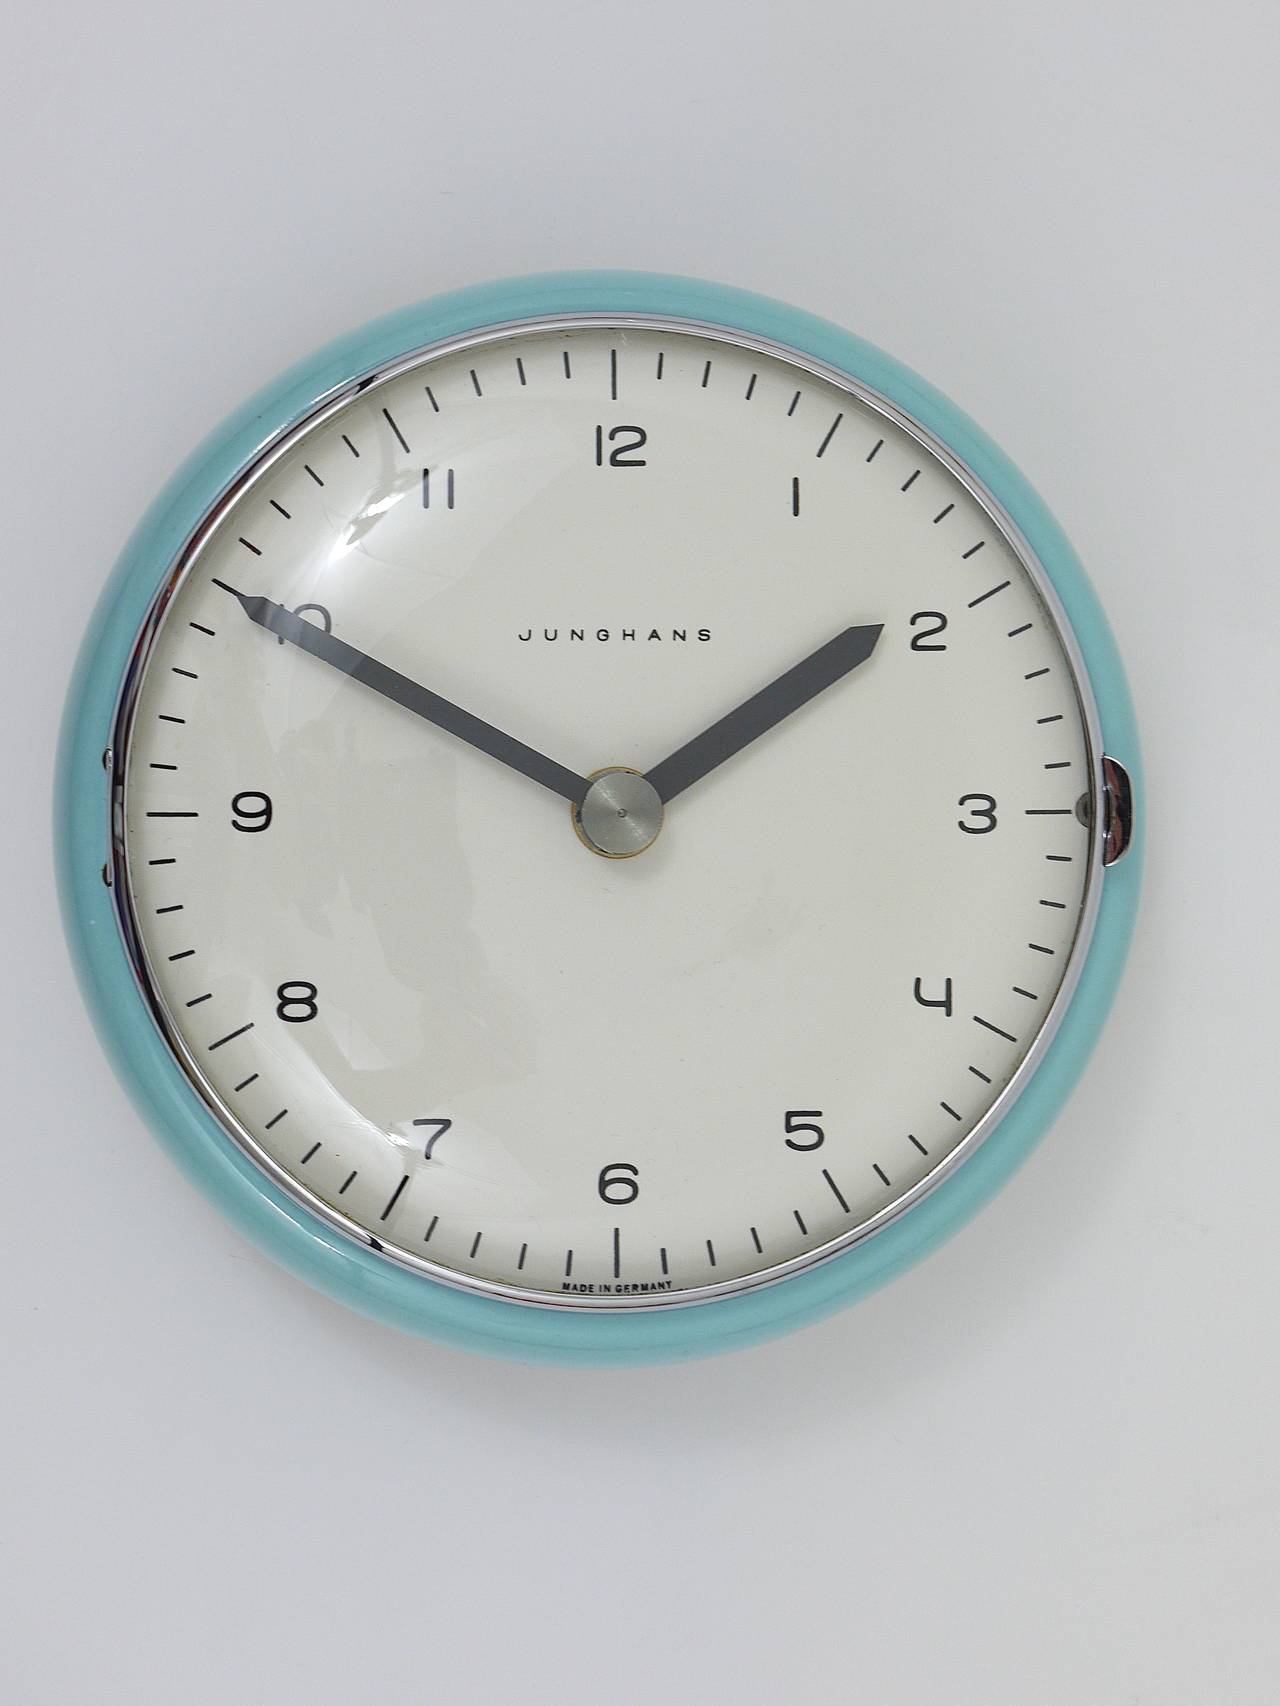 A rare, round mid-century wall clock, designed by Max Bill, executed by Junghans Germany in the 1950s. A beautiful wall clock, with light blue ceramic housing. Powered by its original battery-operated movement. In excellent condition.